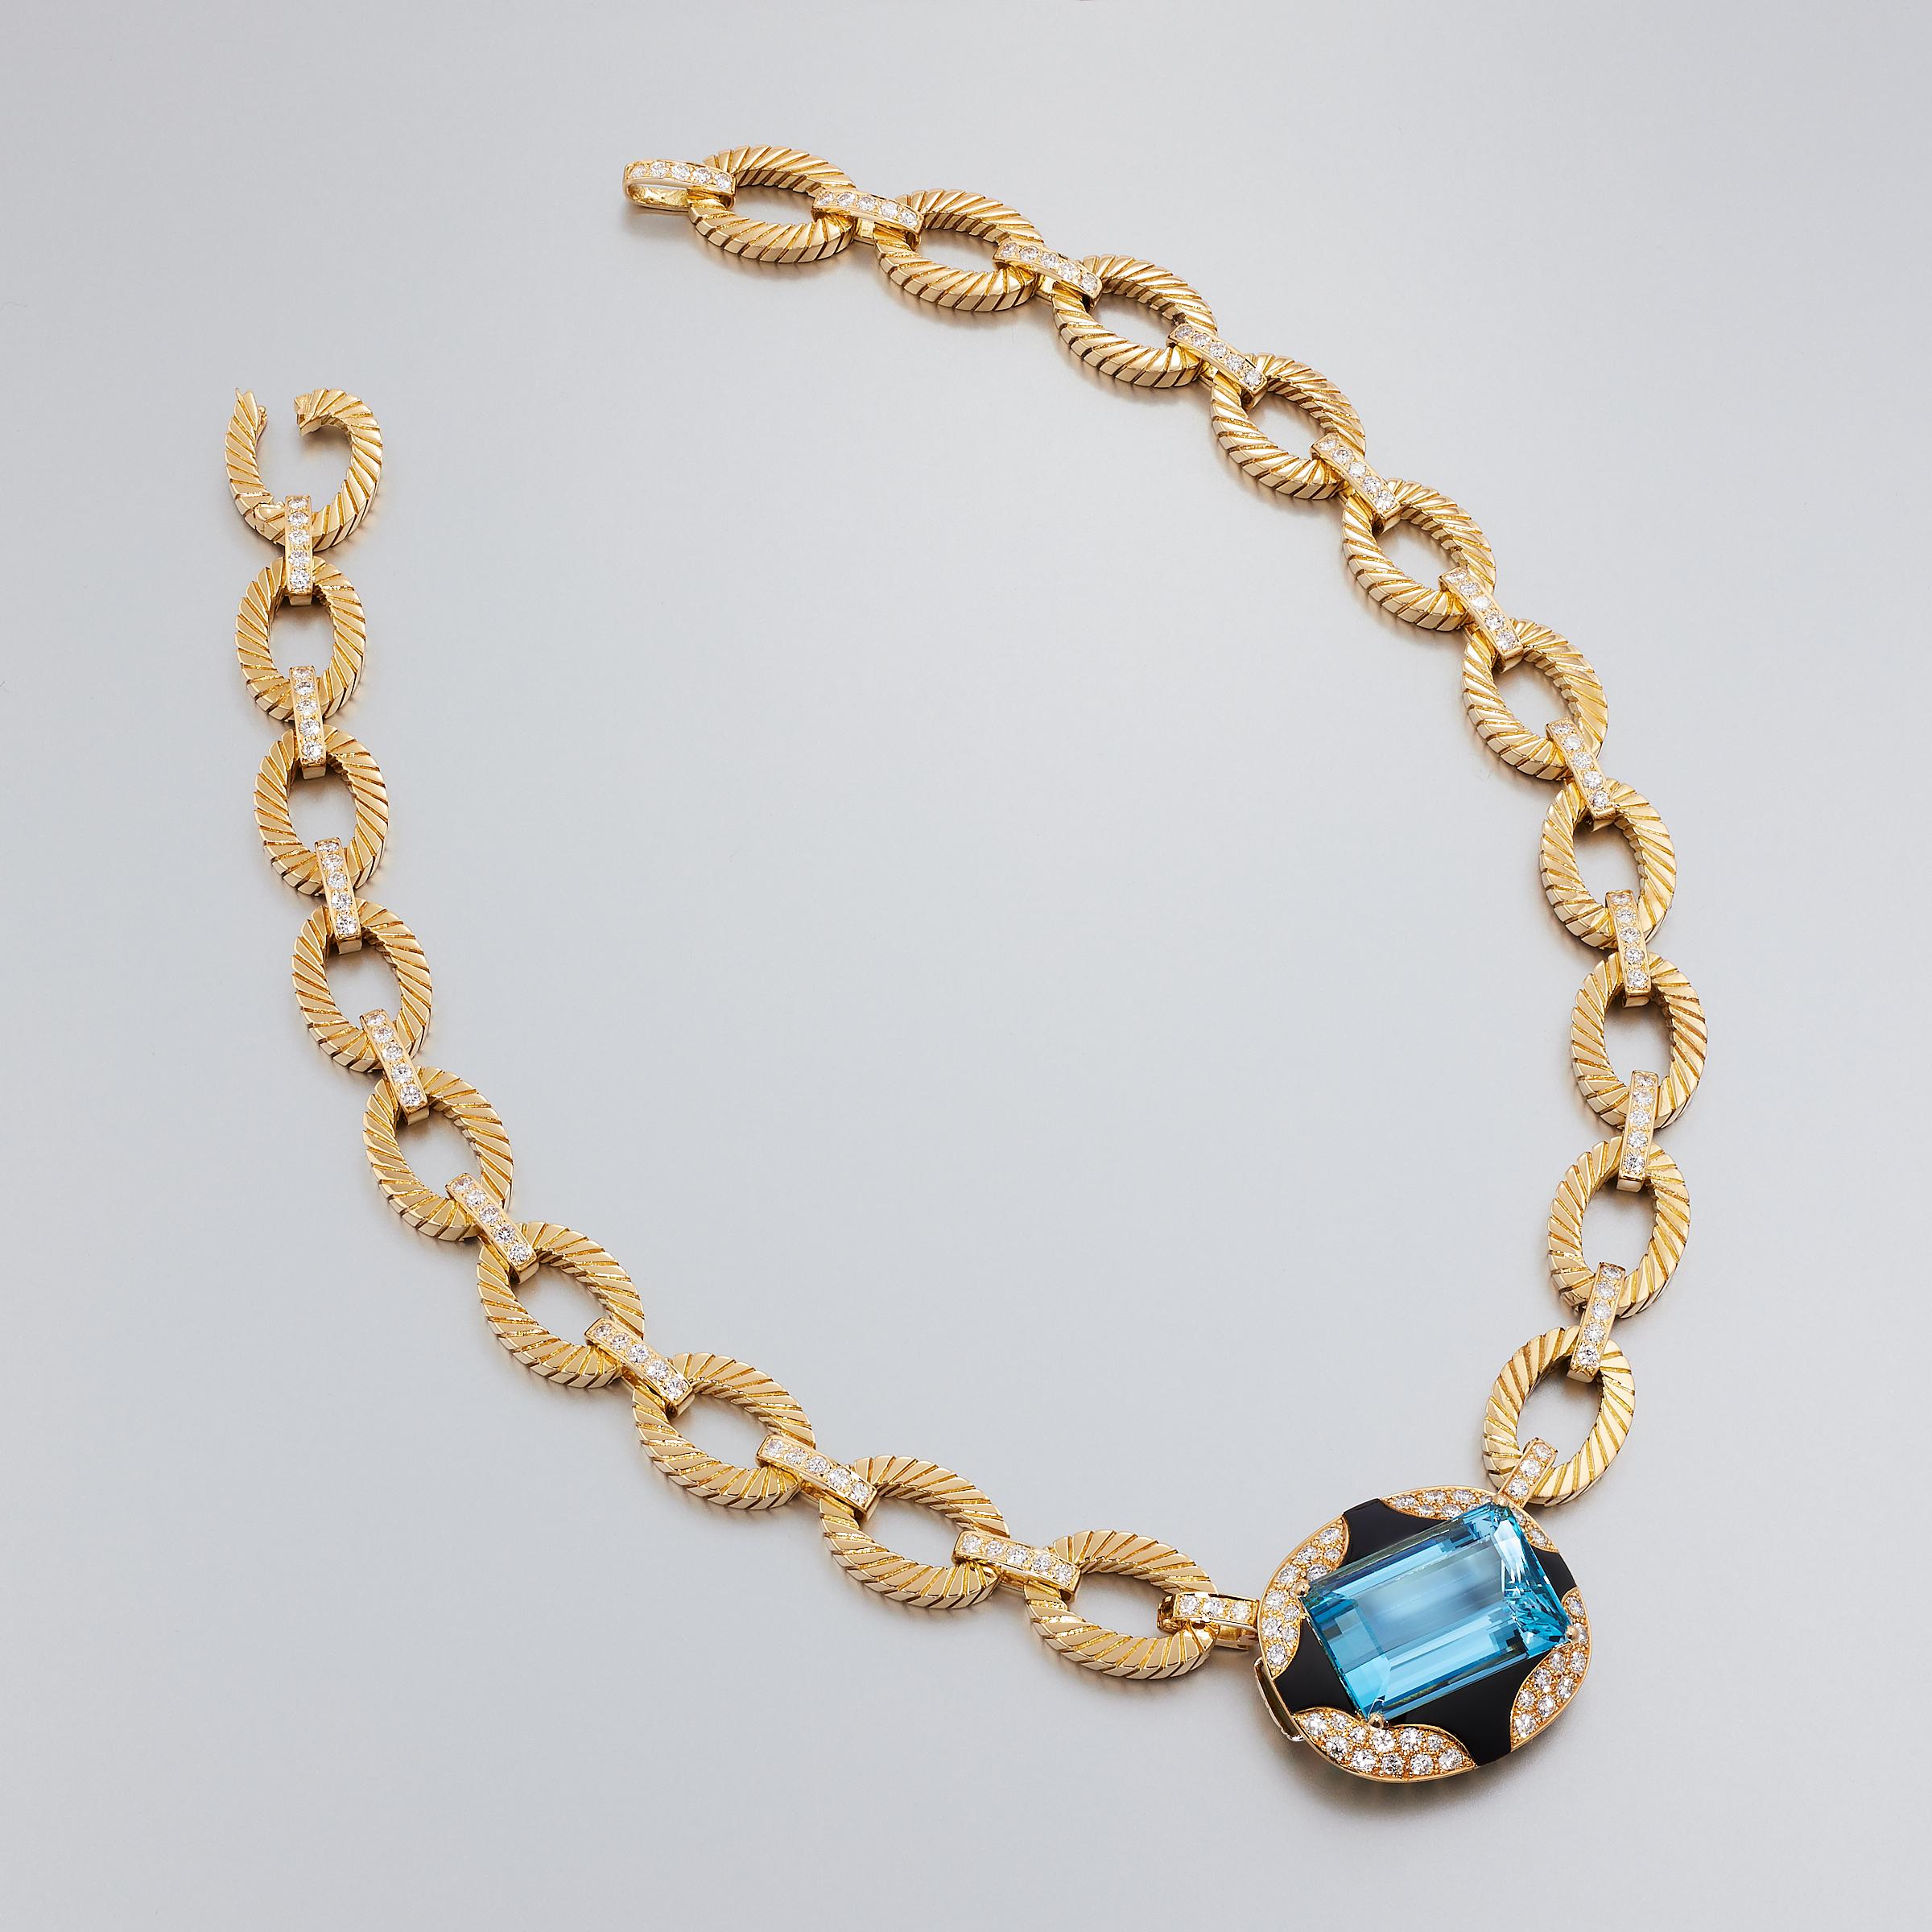 Exceptional one-of-a-kind aquamarine diamond and black onyx suite attributed to Mauboussin Paris and set in 18 karat yellow gold. This impressive suite consists of a necklace, bracelet, and earrings and is a vintage creation dating to 1980s. It is